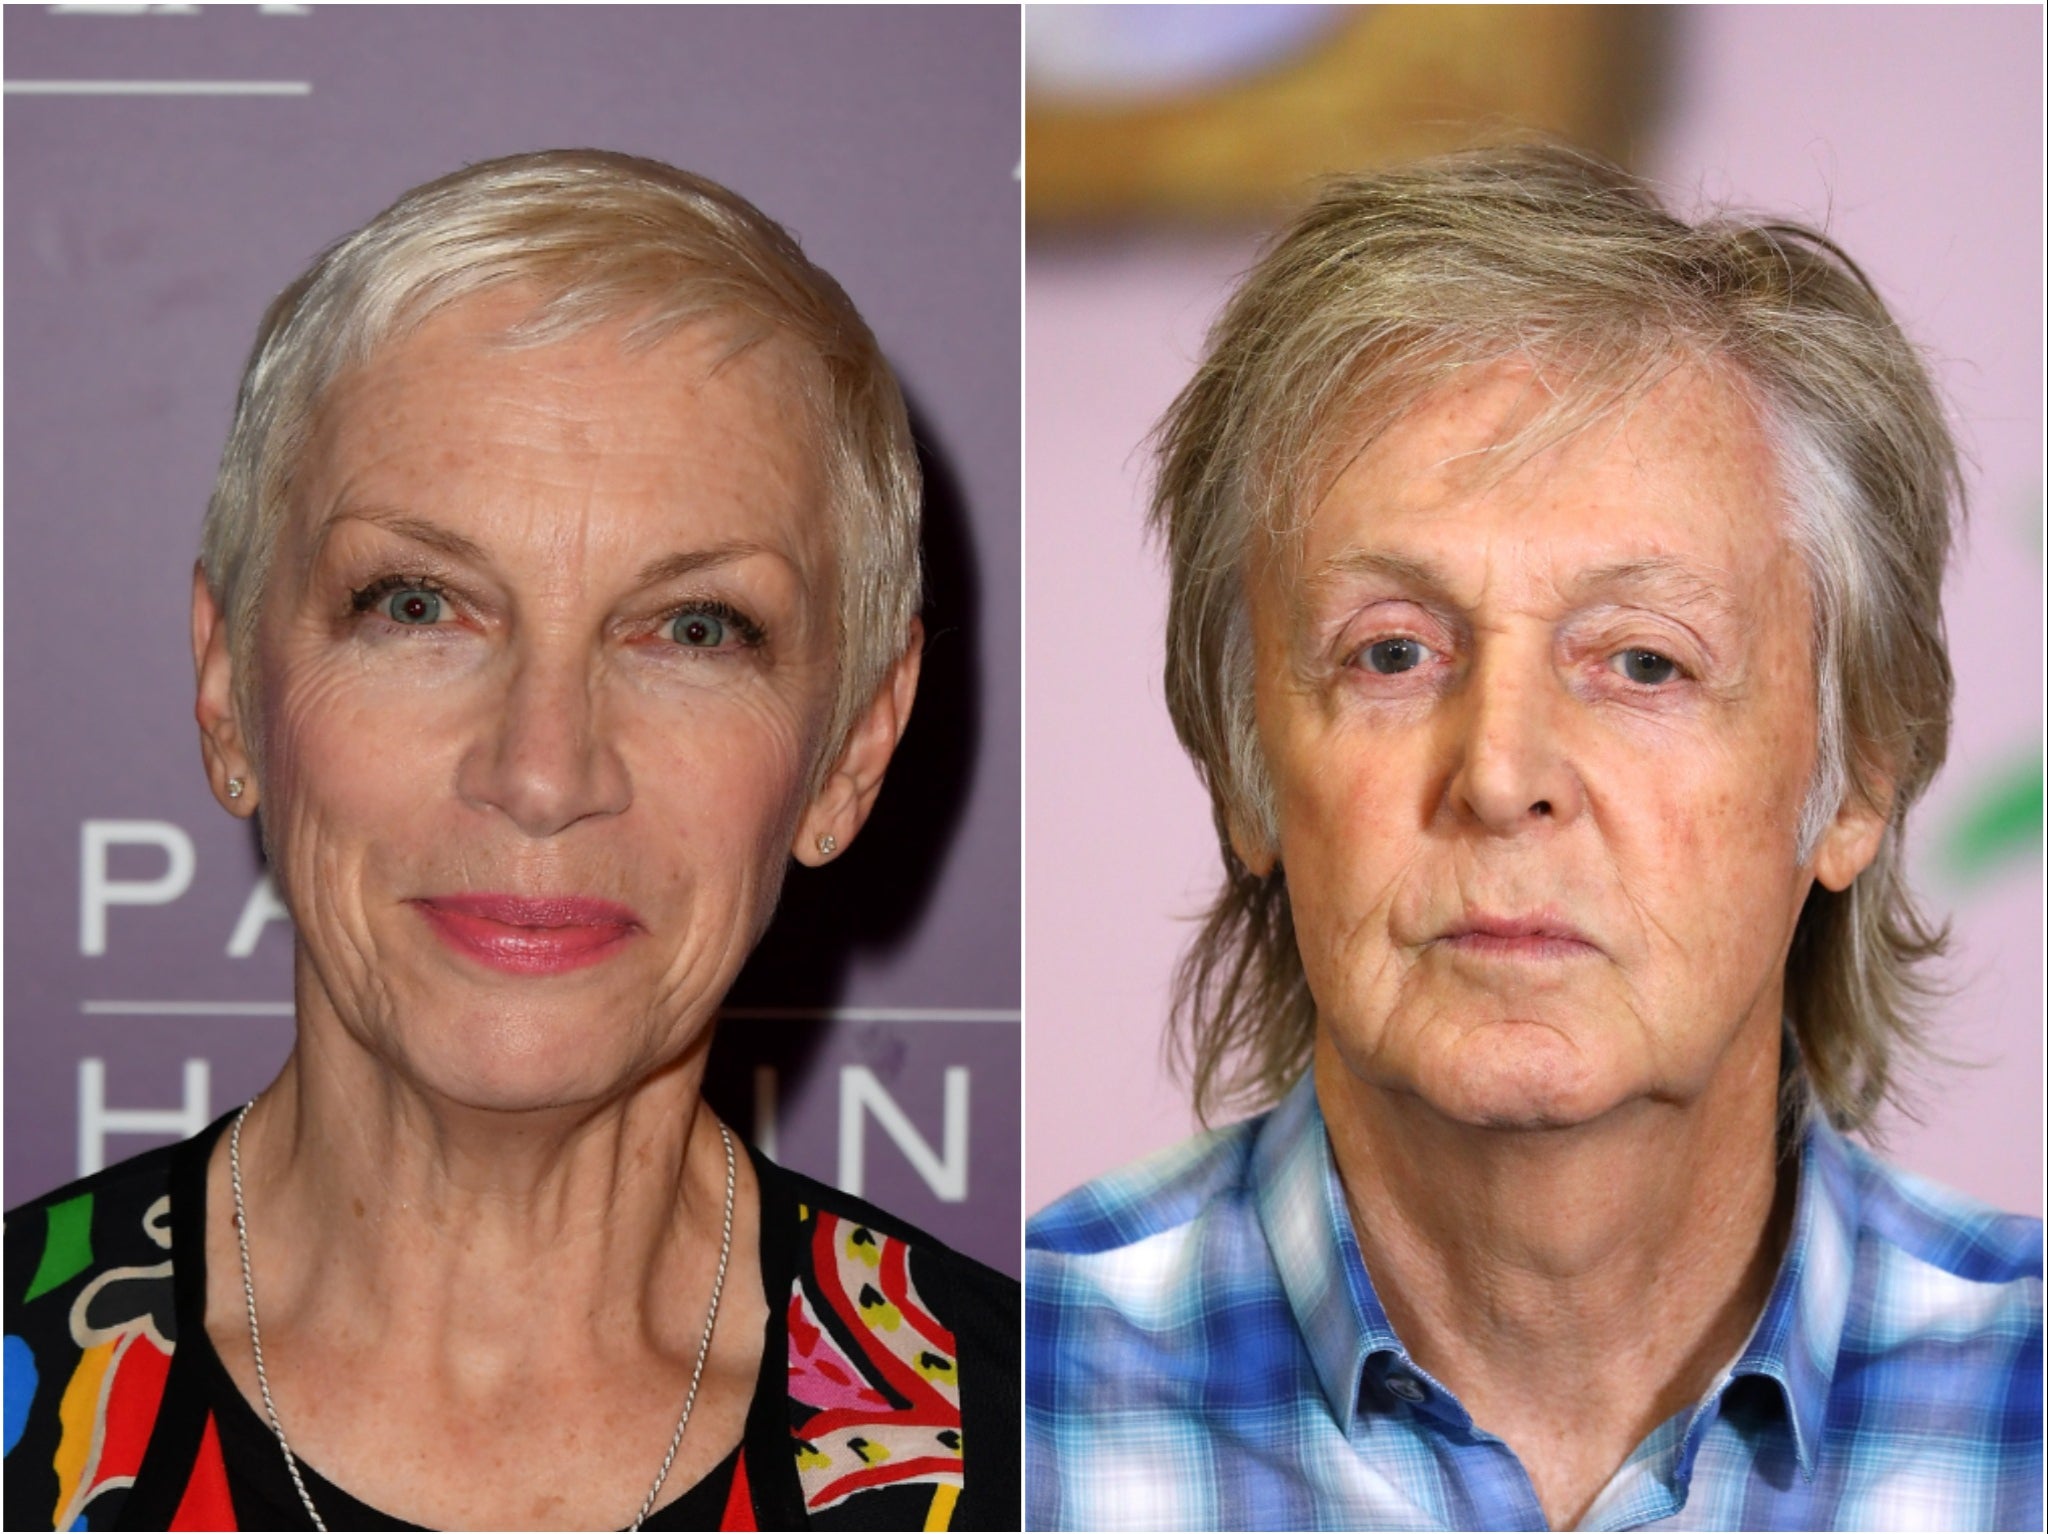 Annie Lennox and Sir Paul McCartney are two of the artists to have signed the document